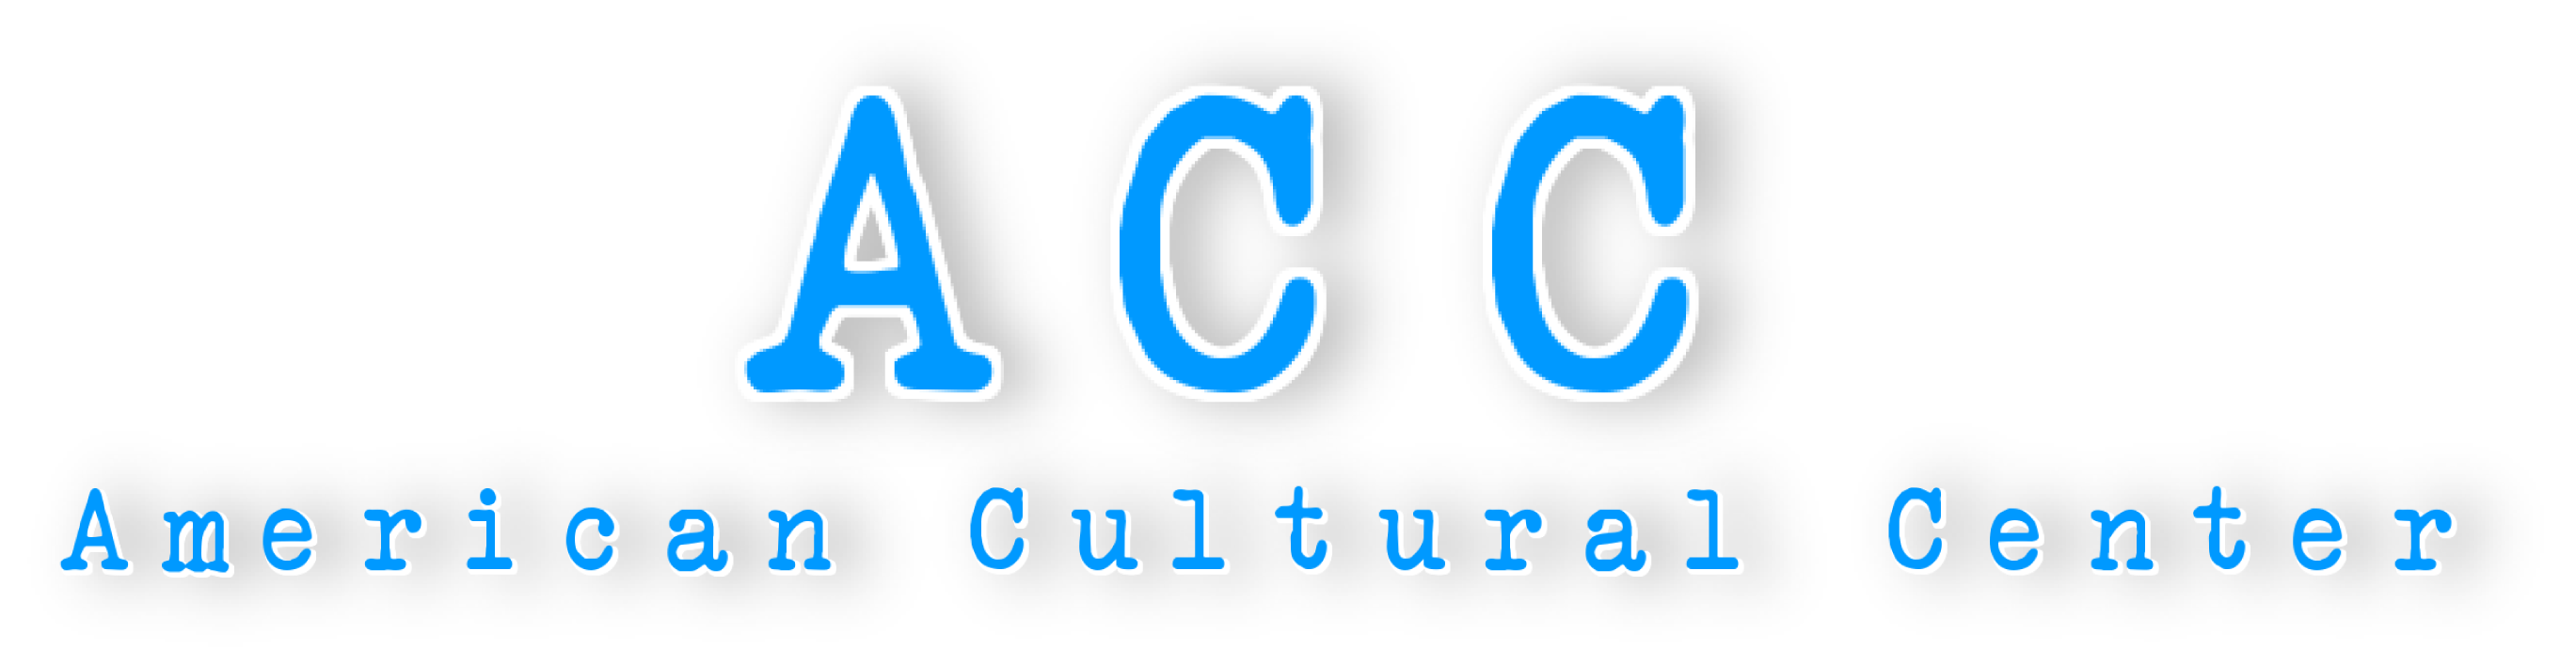 A logo created for the American Cultural Center